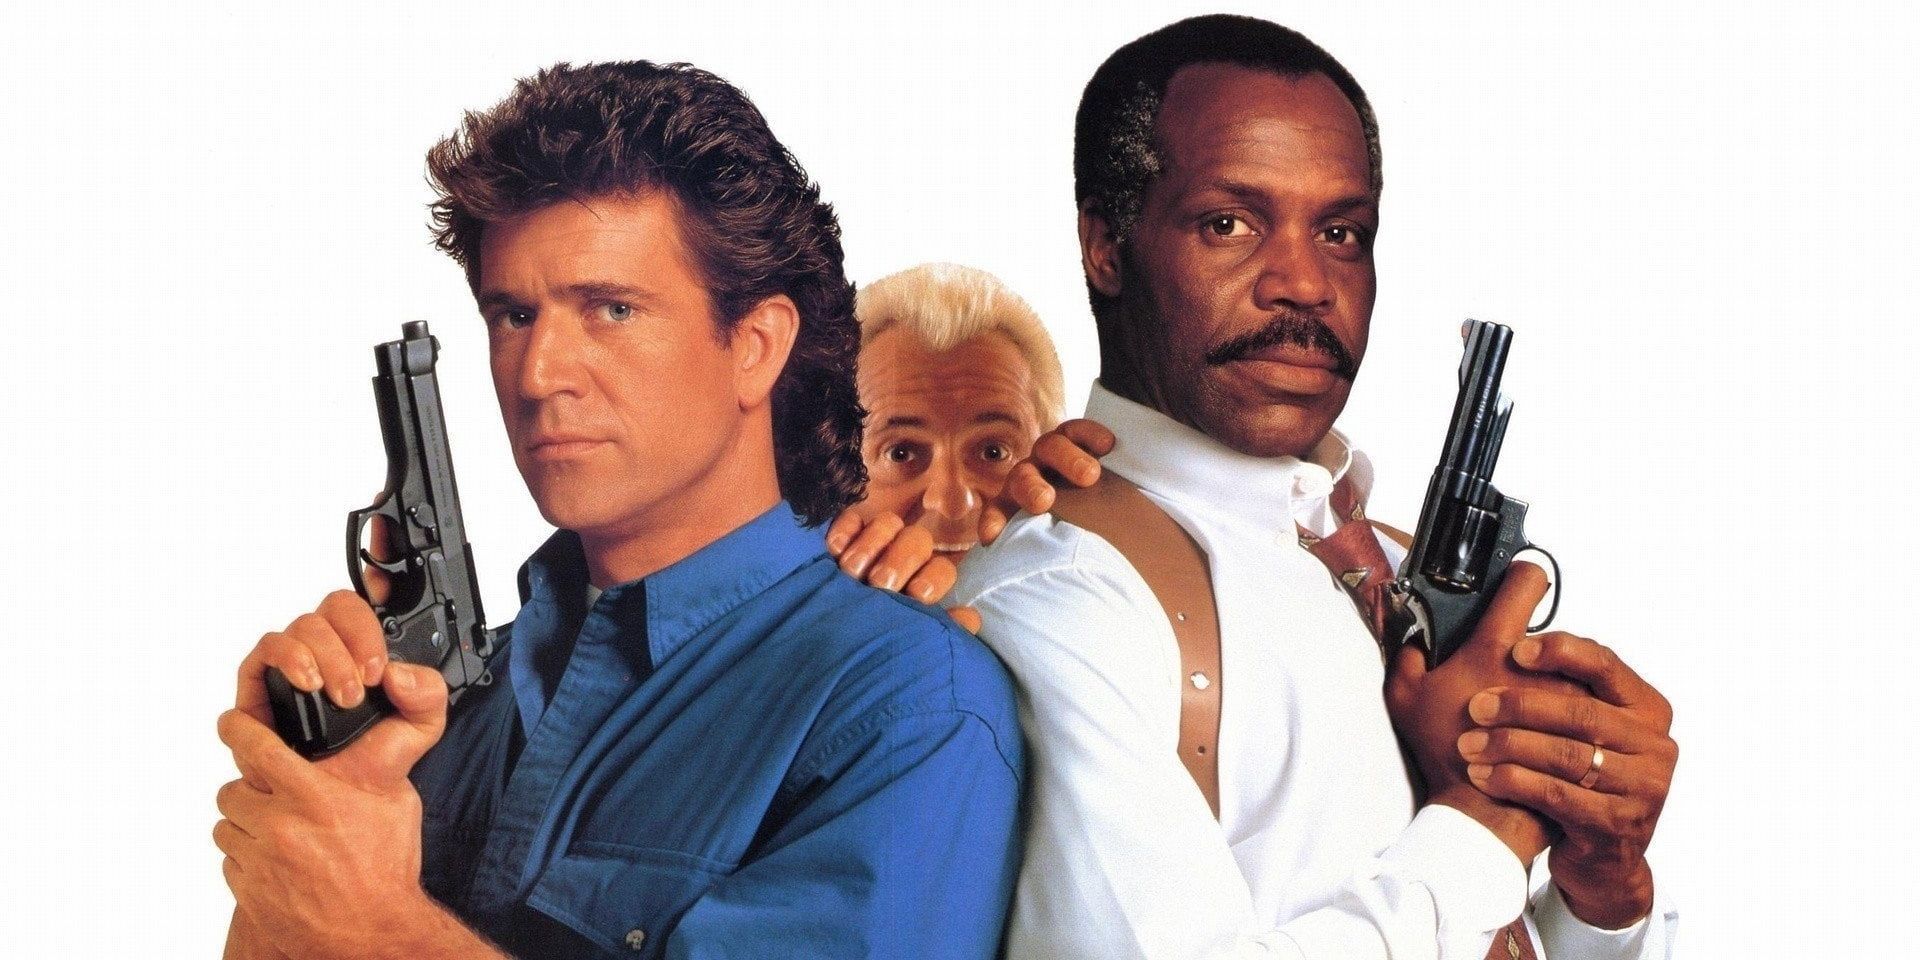 lethal weapon 3 poster cast